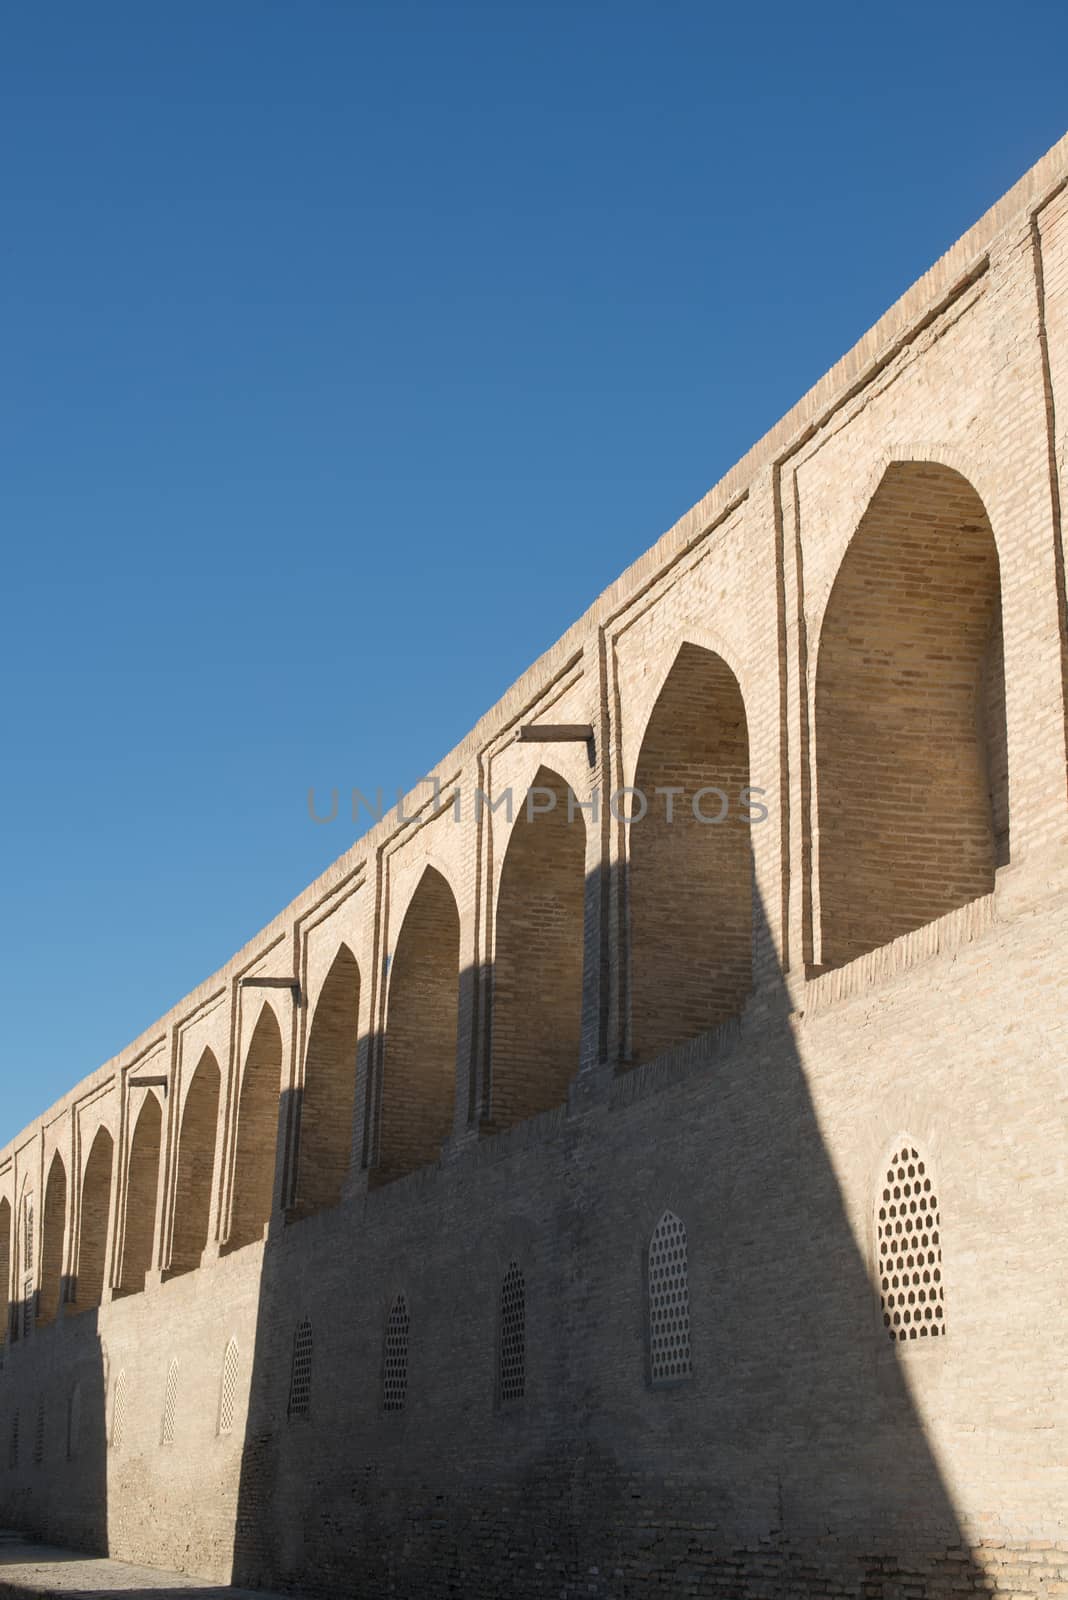 The old building, the wall with arches. Ancient buildings of medieval Asia. Bukhara, Uzbekistan